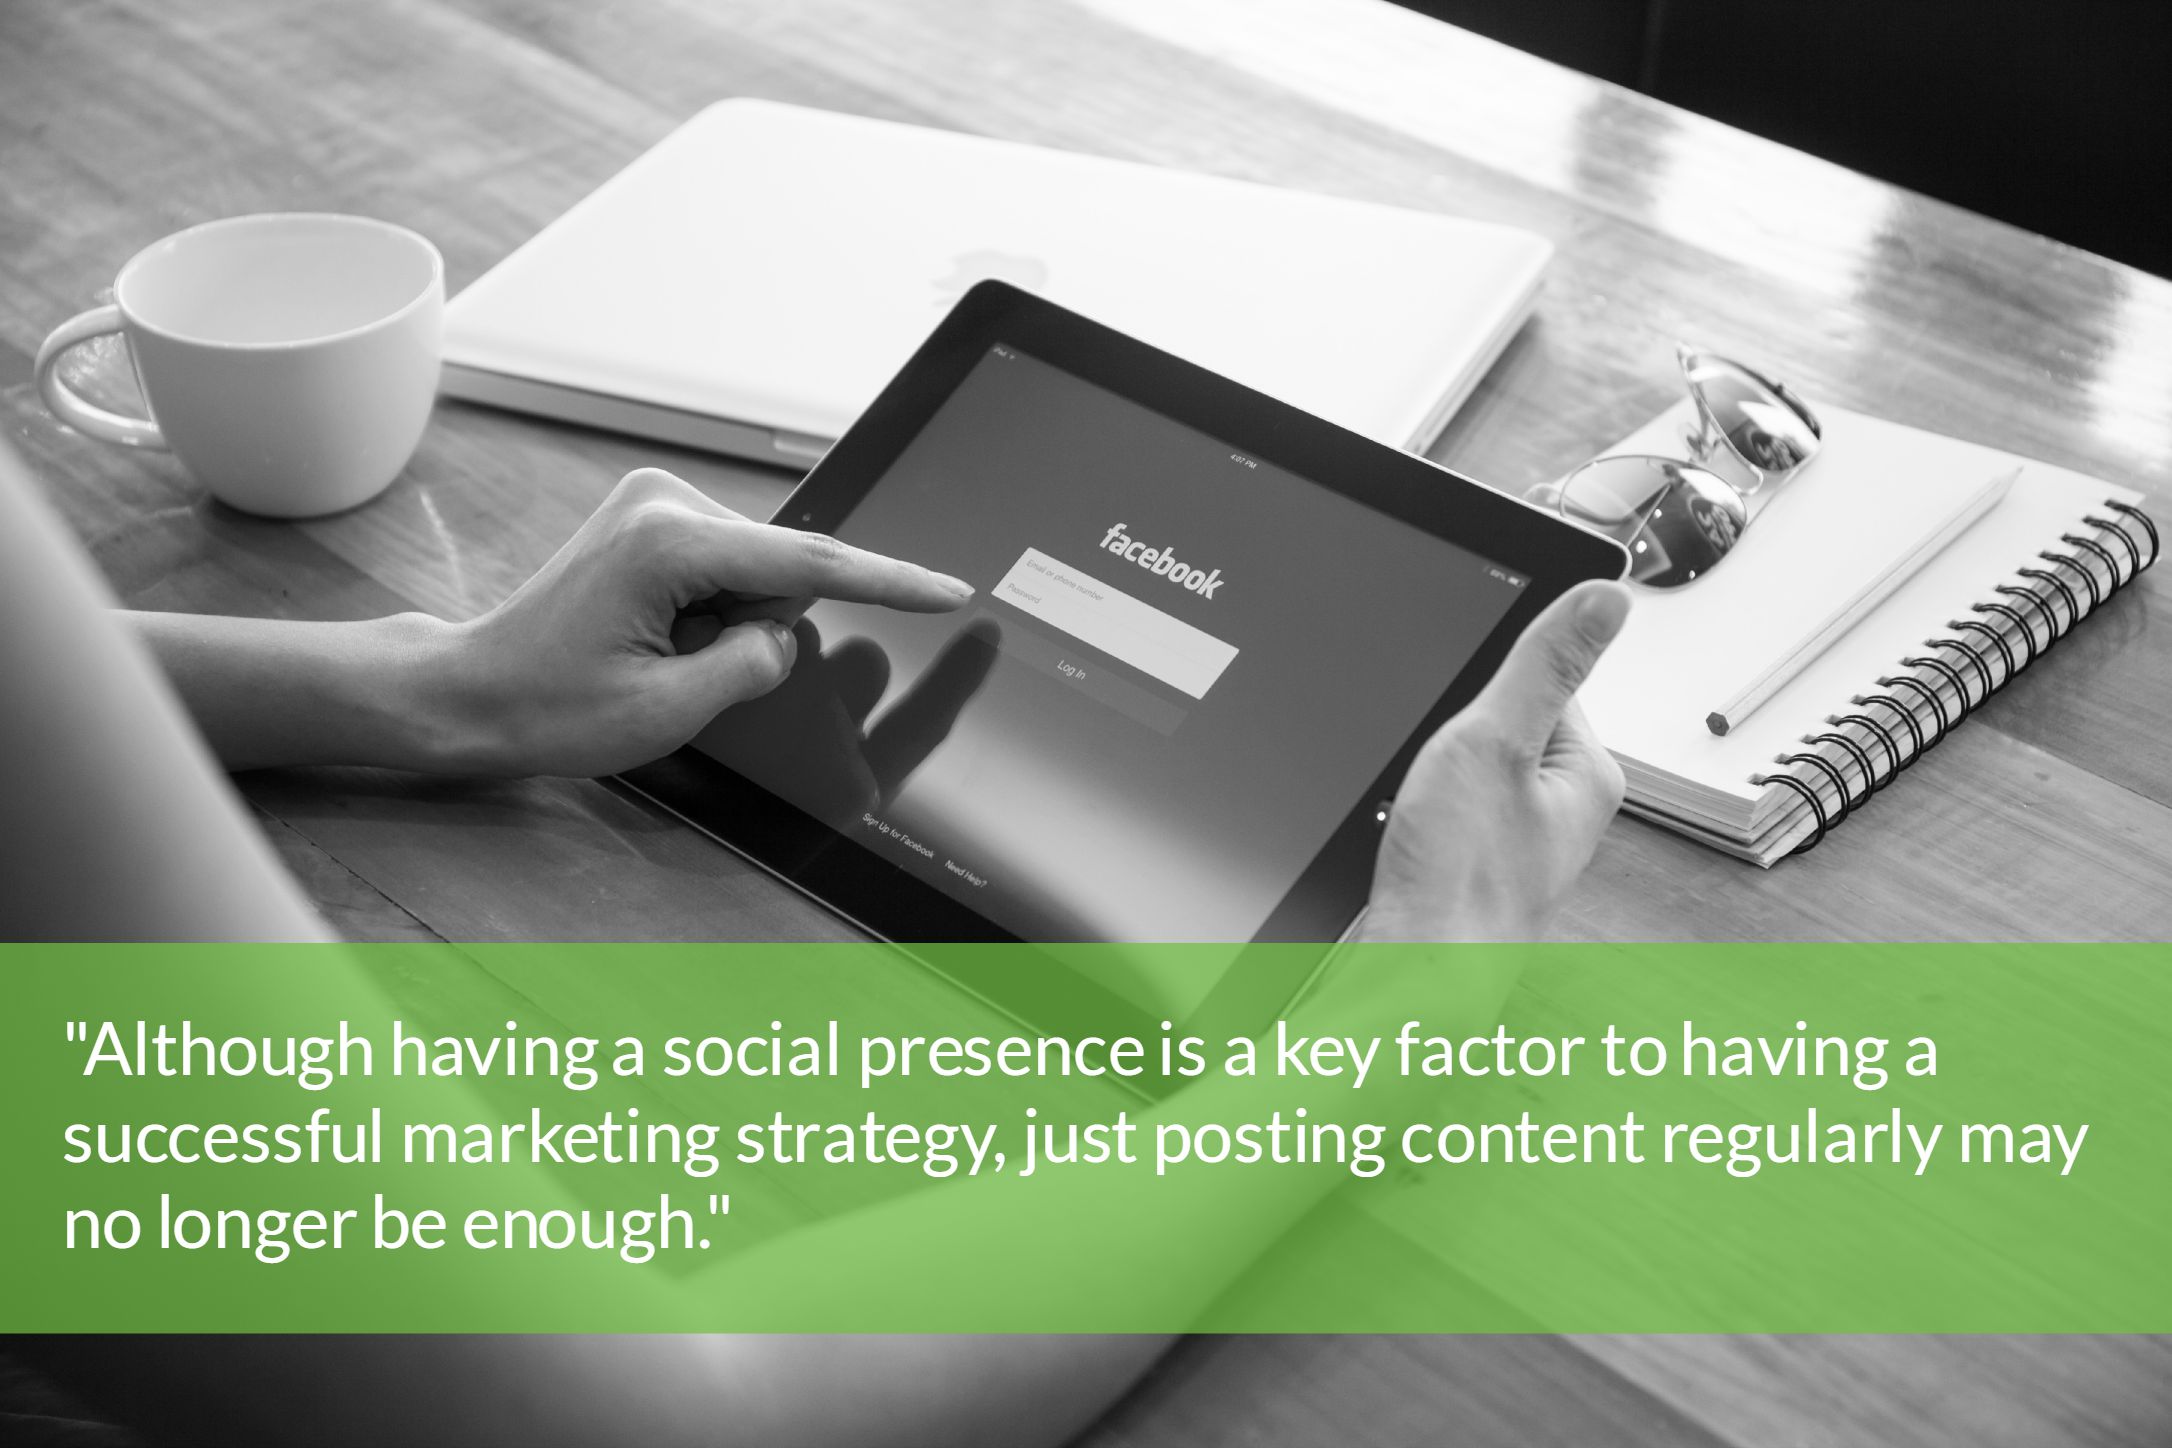 Although having social presence is a key factor to having a successful marketing strategy, just posting content regularly may no longer be enough 